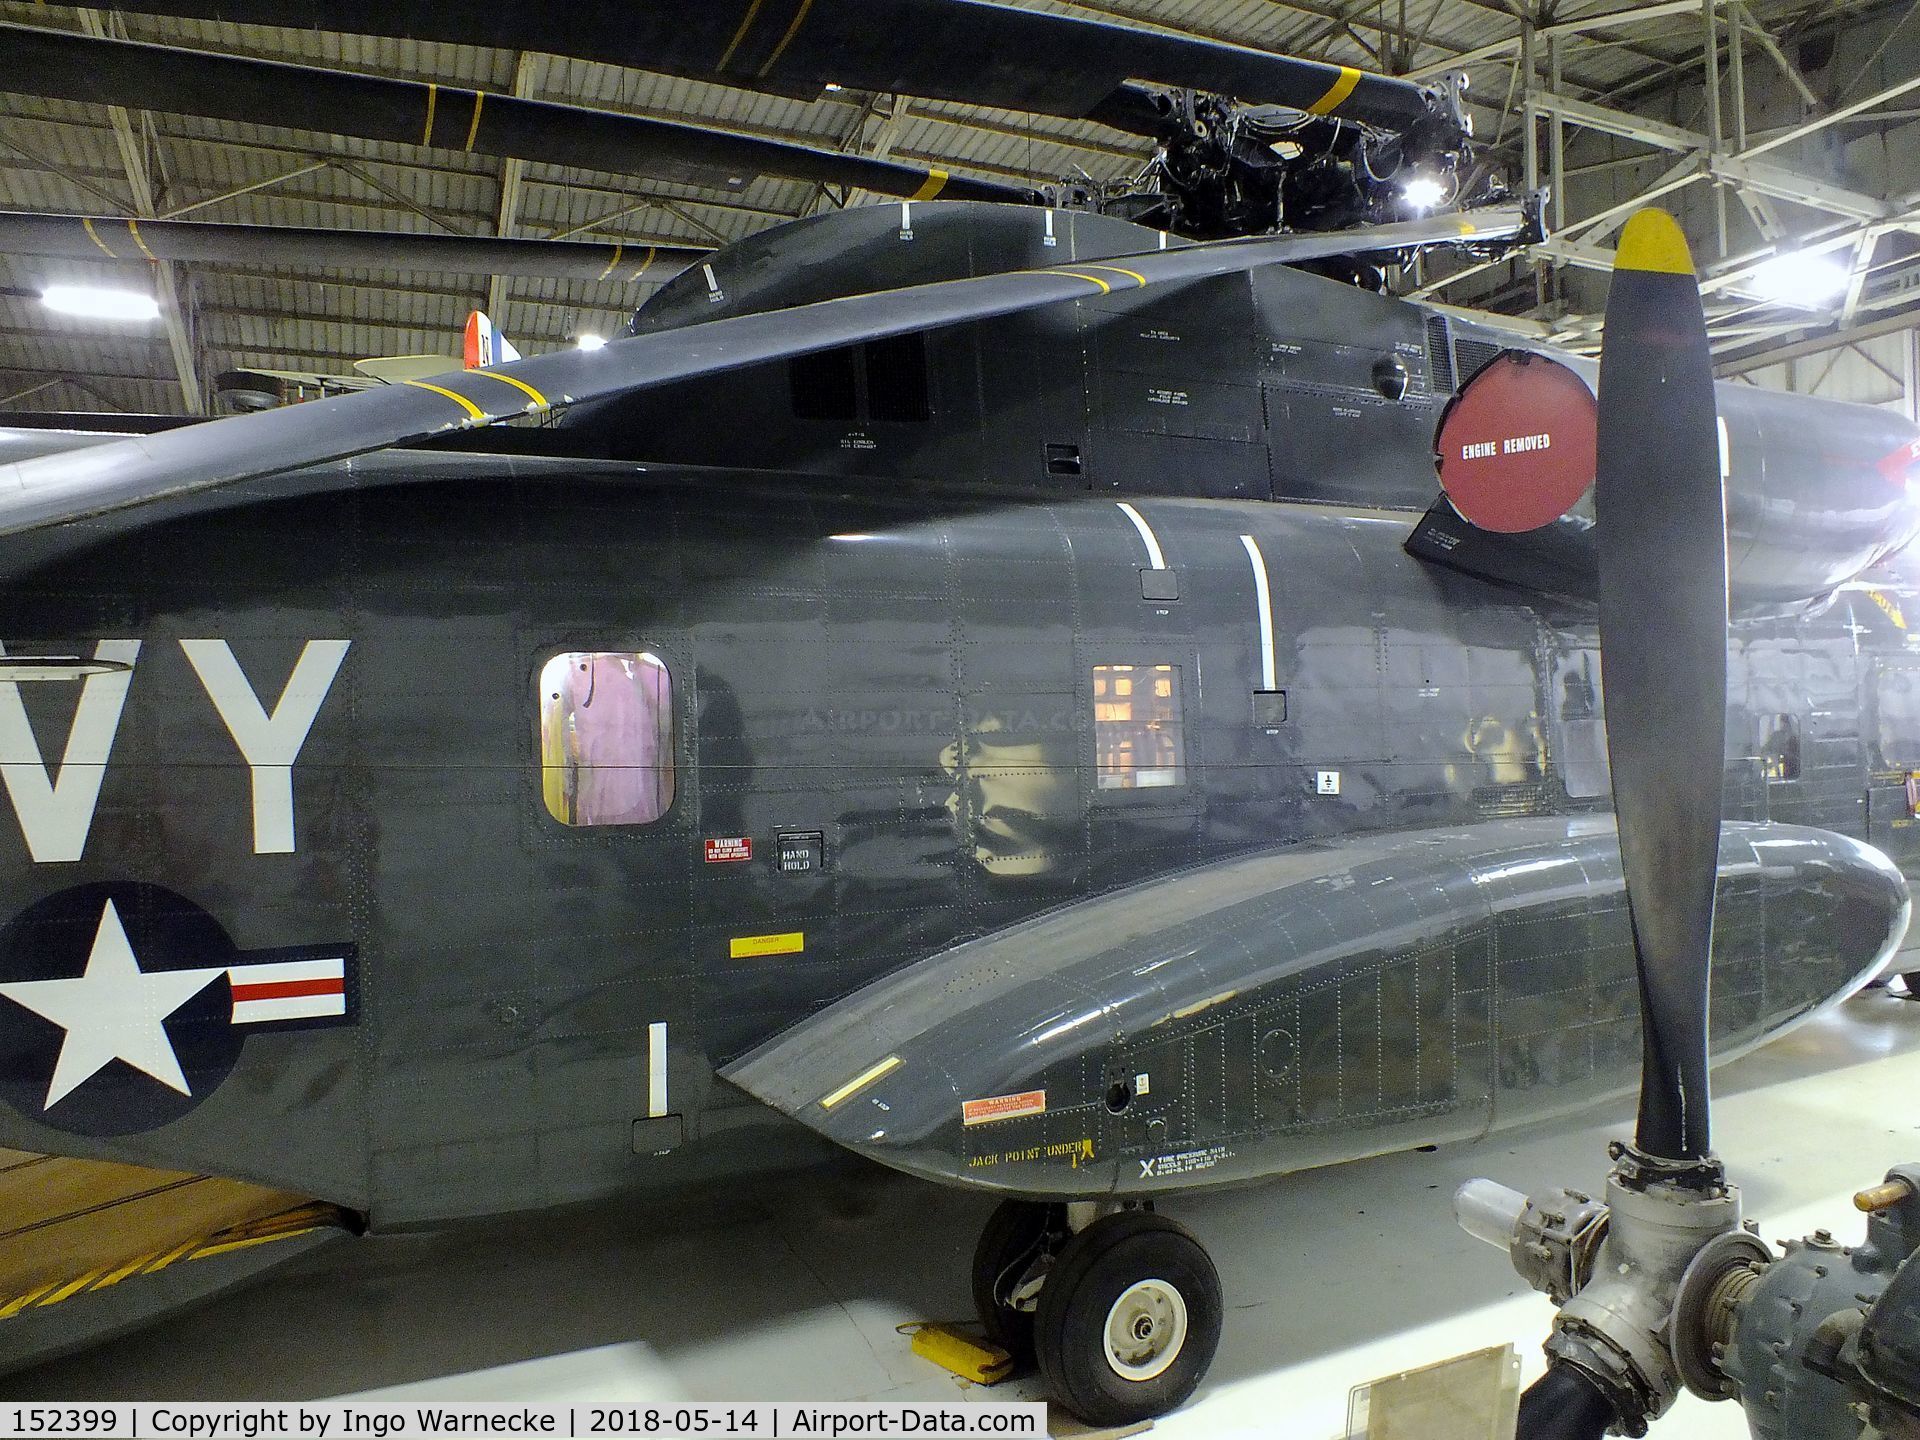 152399, Sikorsky CH-53A Sea Stallion C/N 65-026, Sikorsky CH-53A Sea Stallion (became NCH-53A while used by NASA) at the Combat Air Museum, Topeka KS